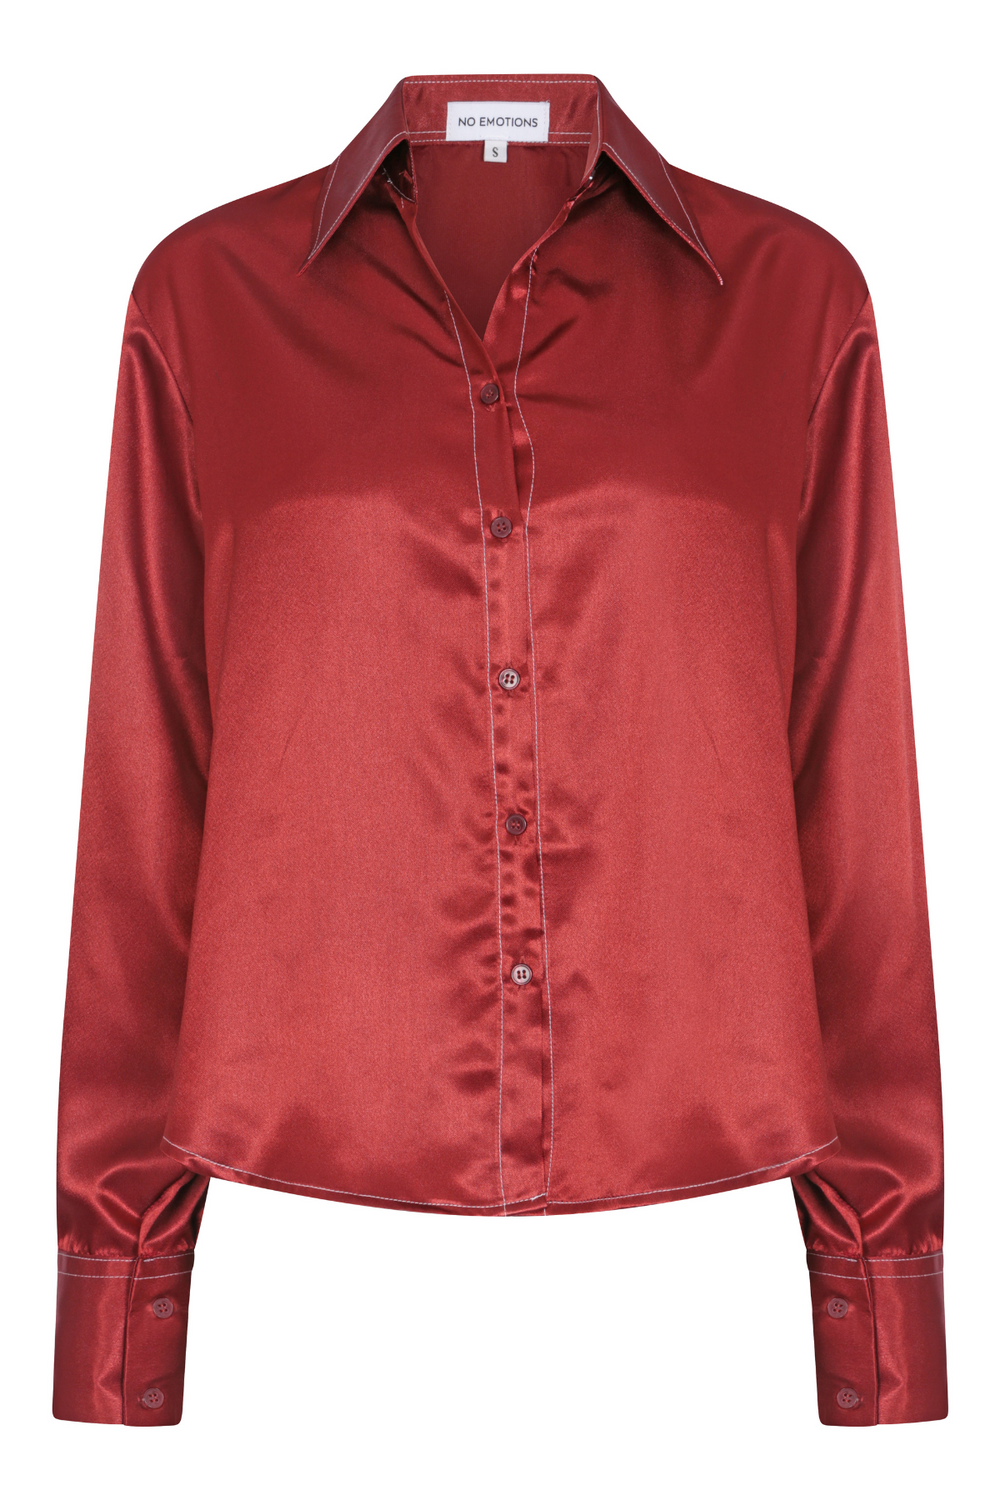 rust silk shirt with contrast stitching with a statement collar and cuffs